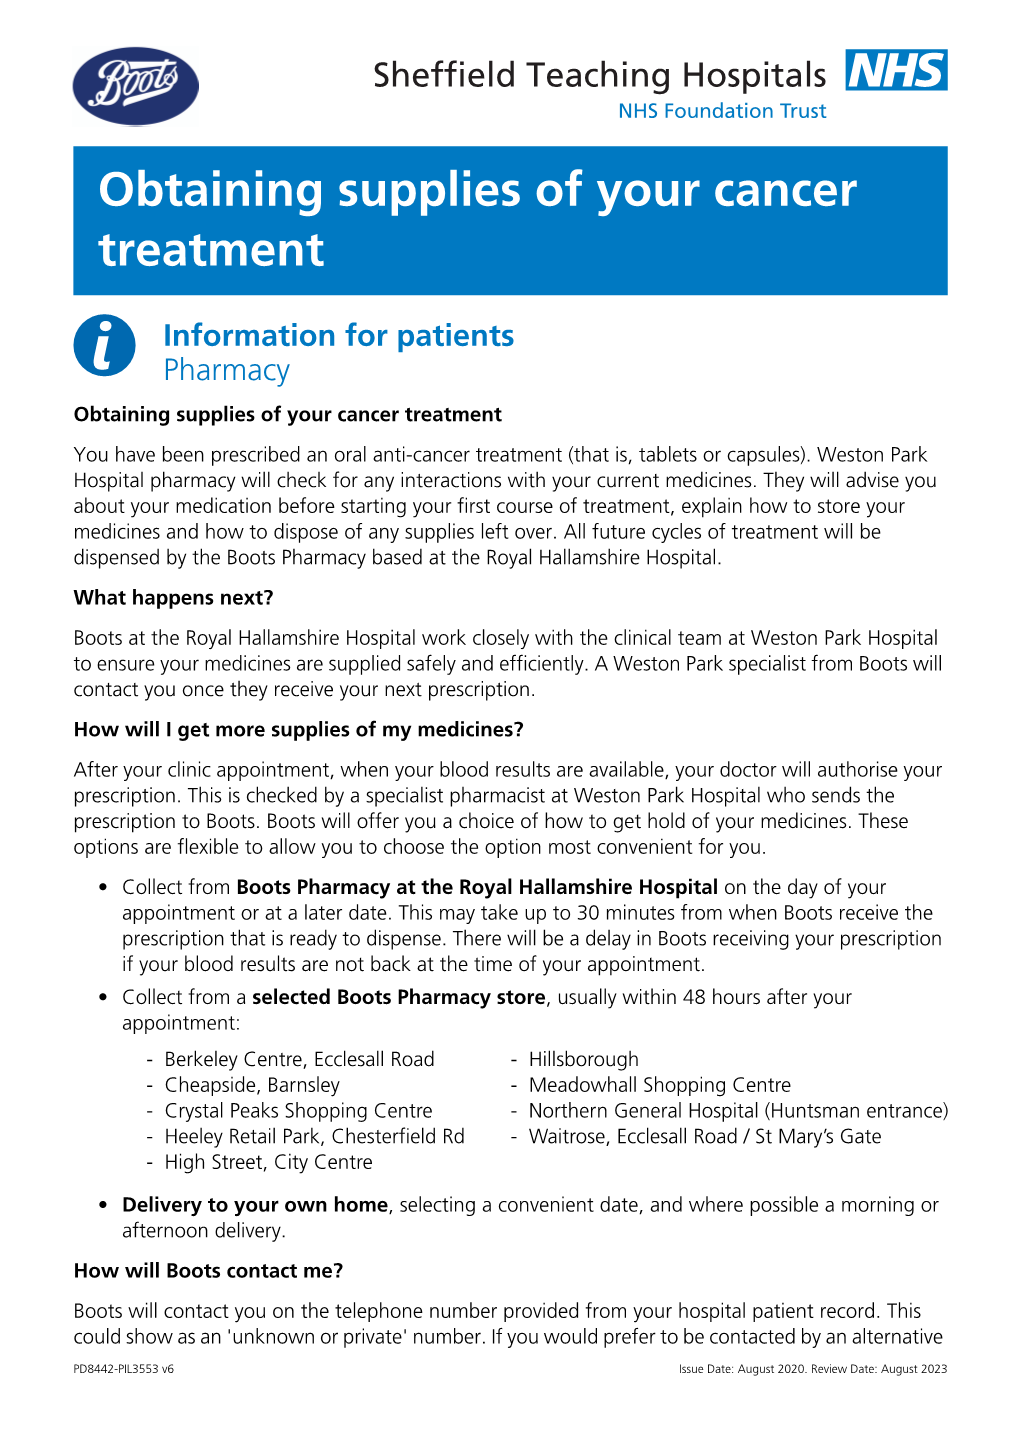 Obtaining Supplies of Your Cancer Treatment